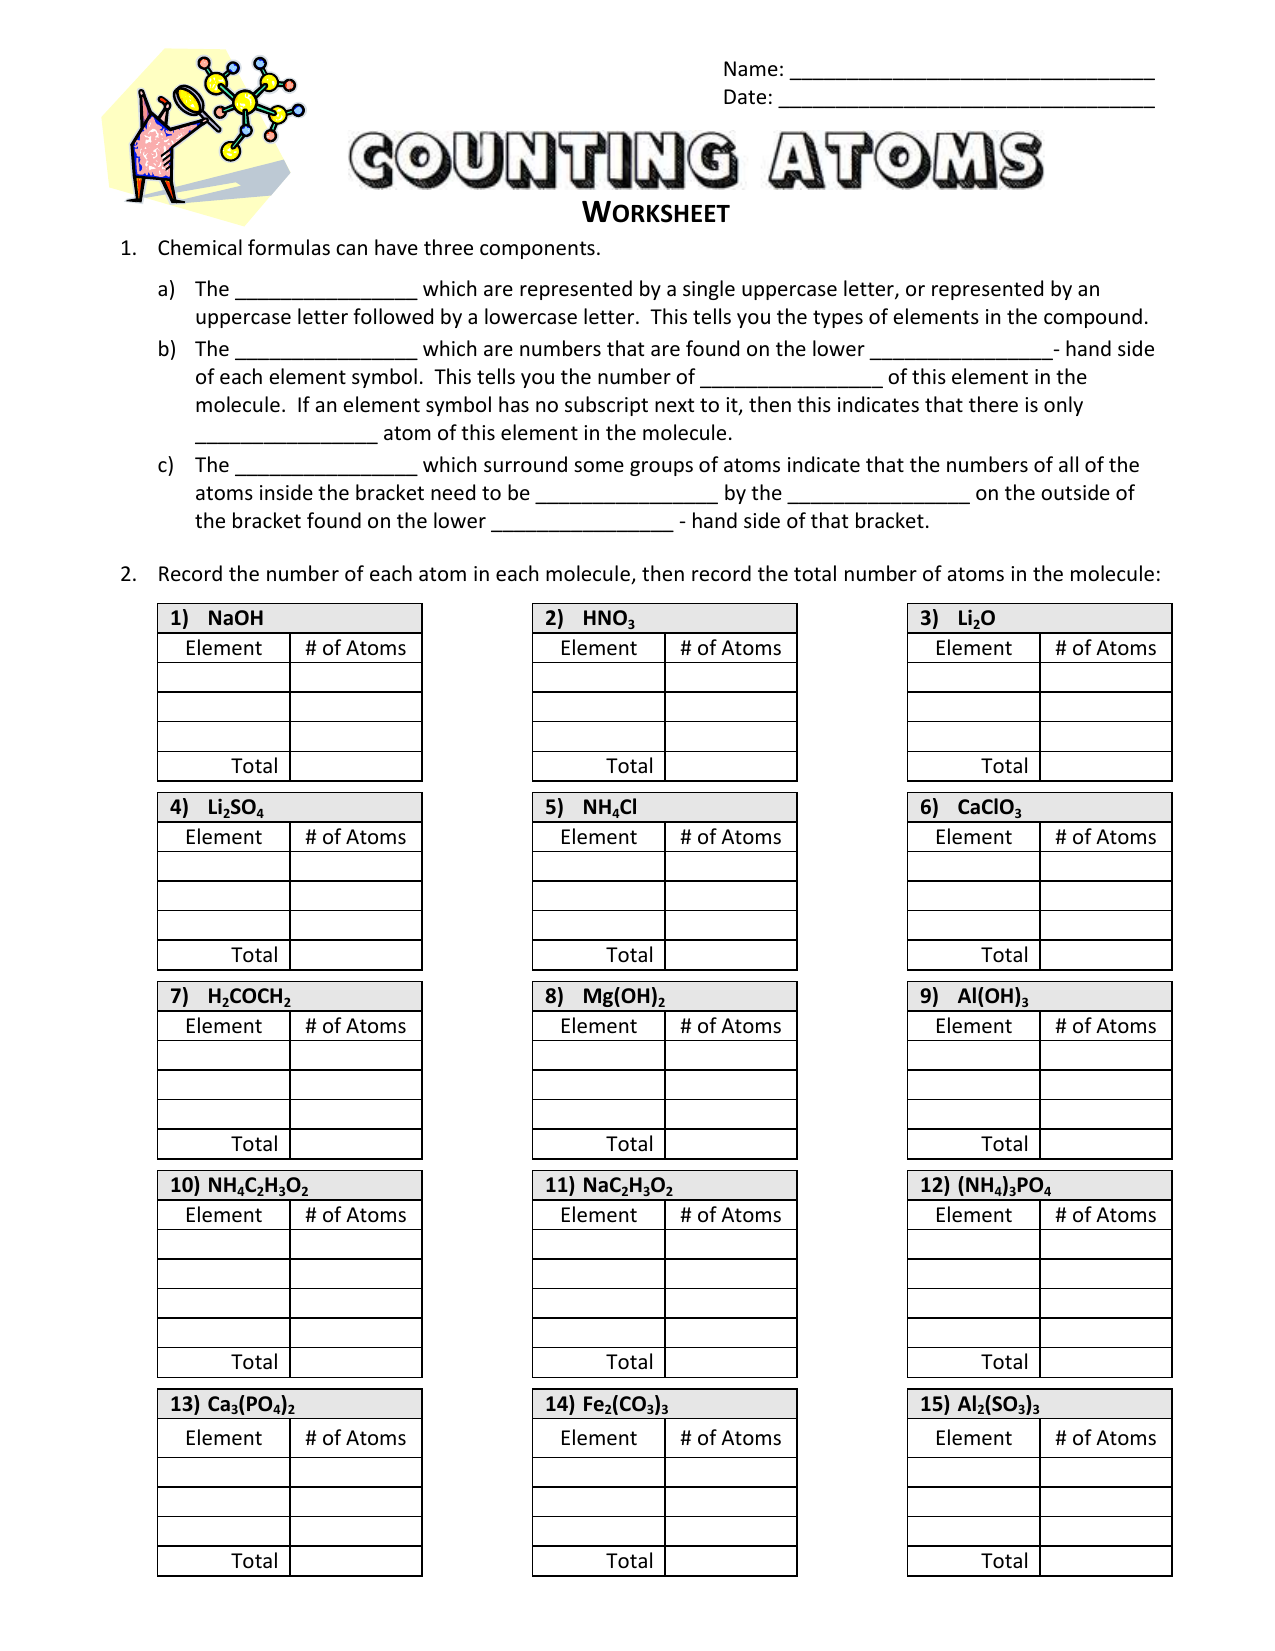 Counting Atoms - Worksheet For Counting Atoms Worksheet Answers